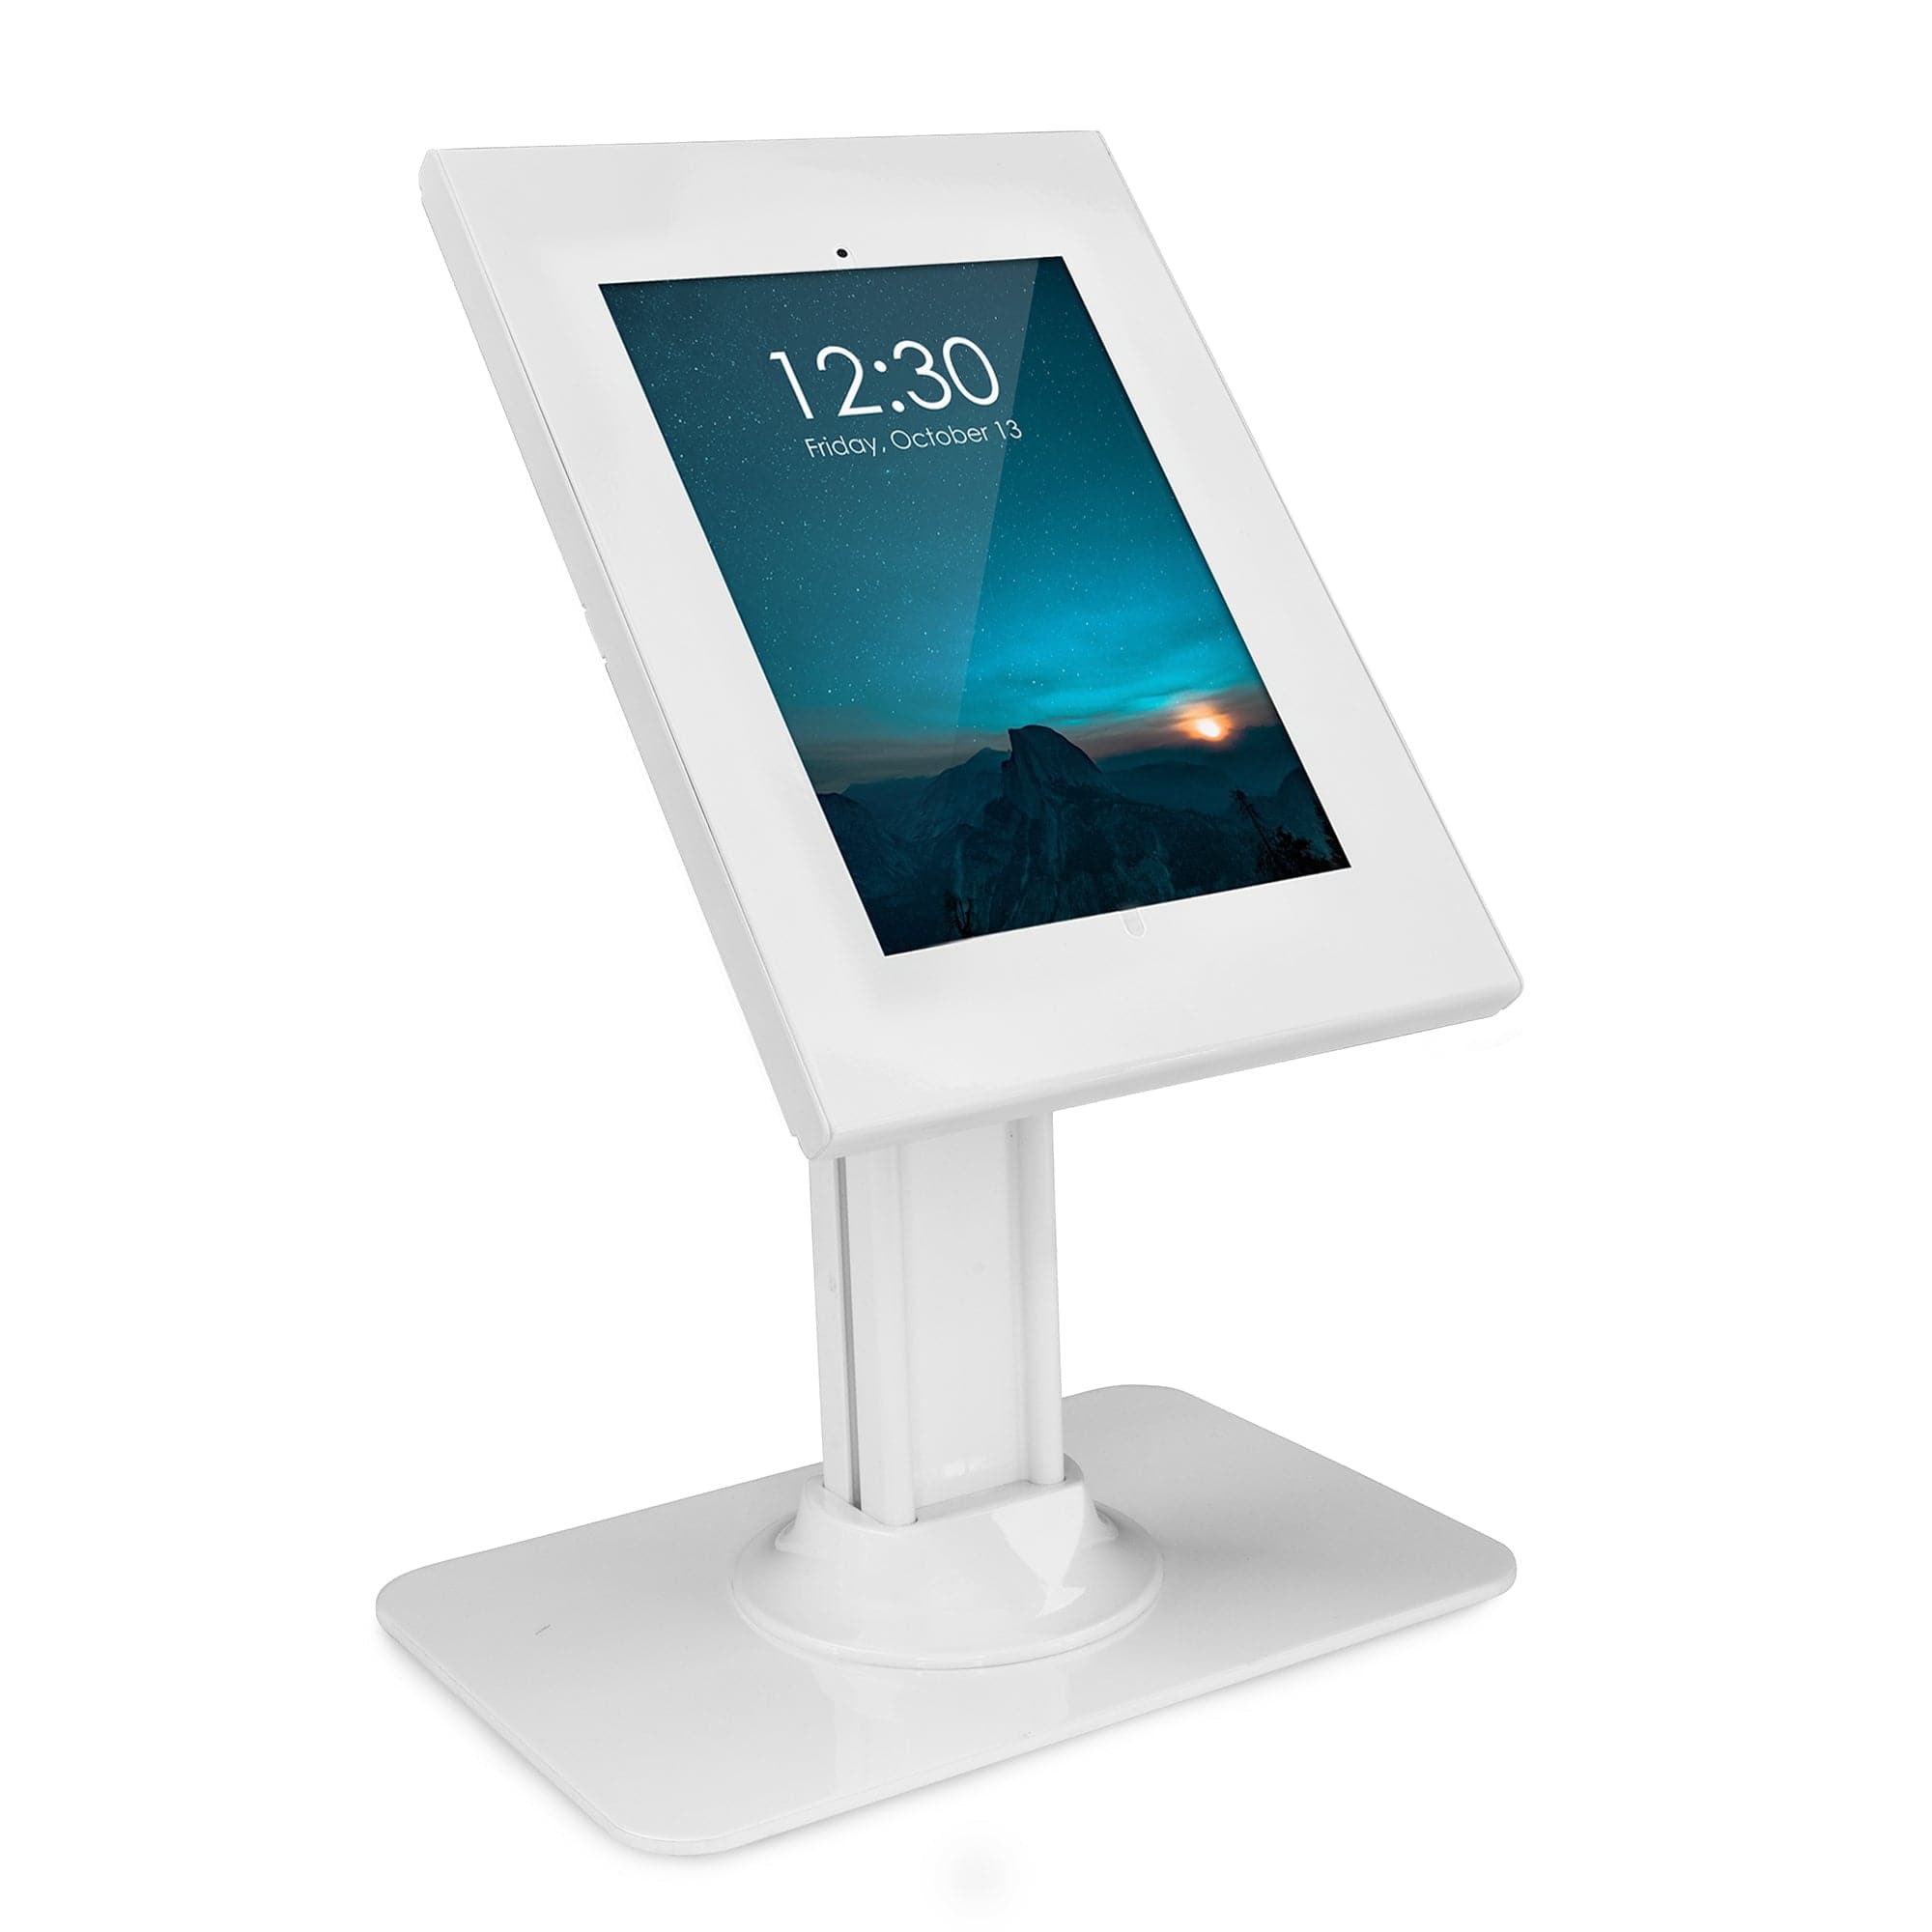 Secure iPad Countertop Stand for 7th Generation iPad - Mount-It!